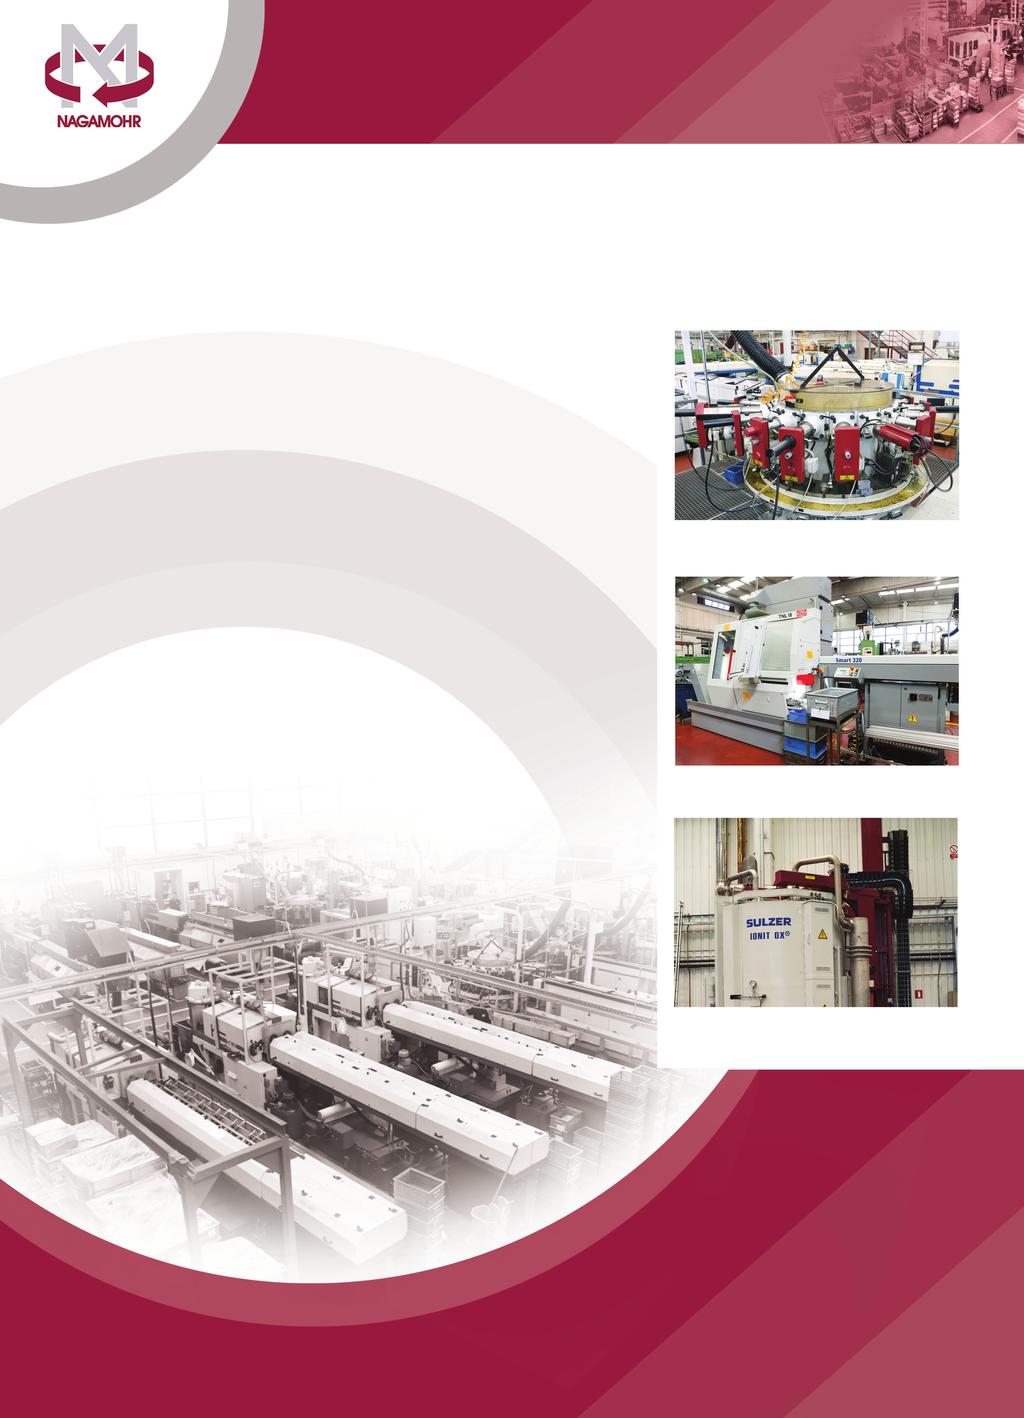 PRODUCTION MEANS MEDIOS PRODUCTIVOS Nagamohr is equipped with more than 50 machines of the latest technology, highlighting among others: Hydromat CNC rotary transfer machines 12-16 stations CNC Swiss